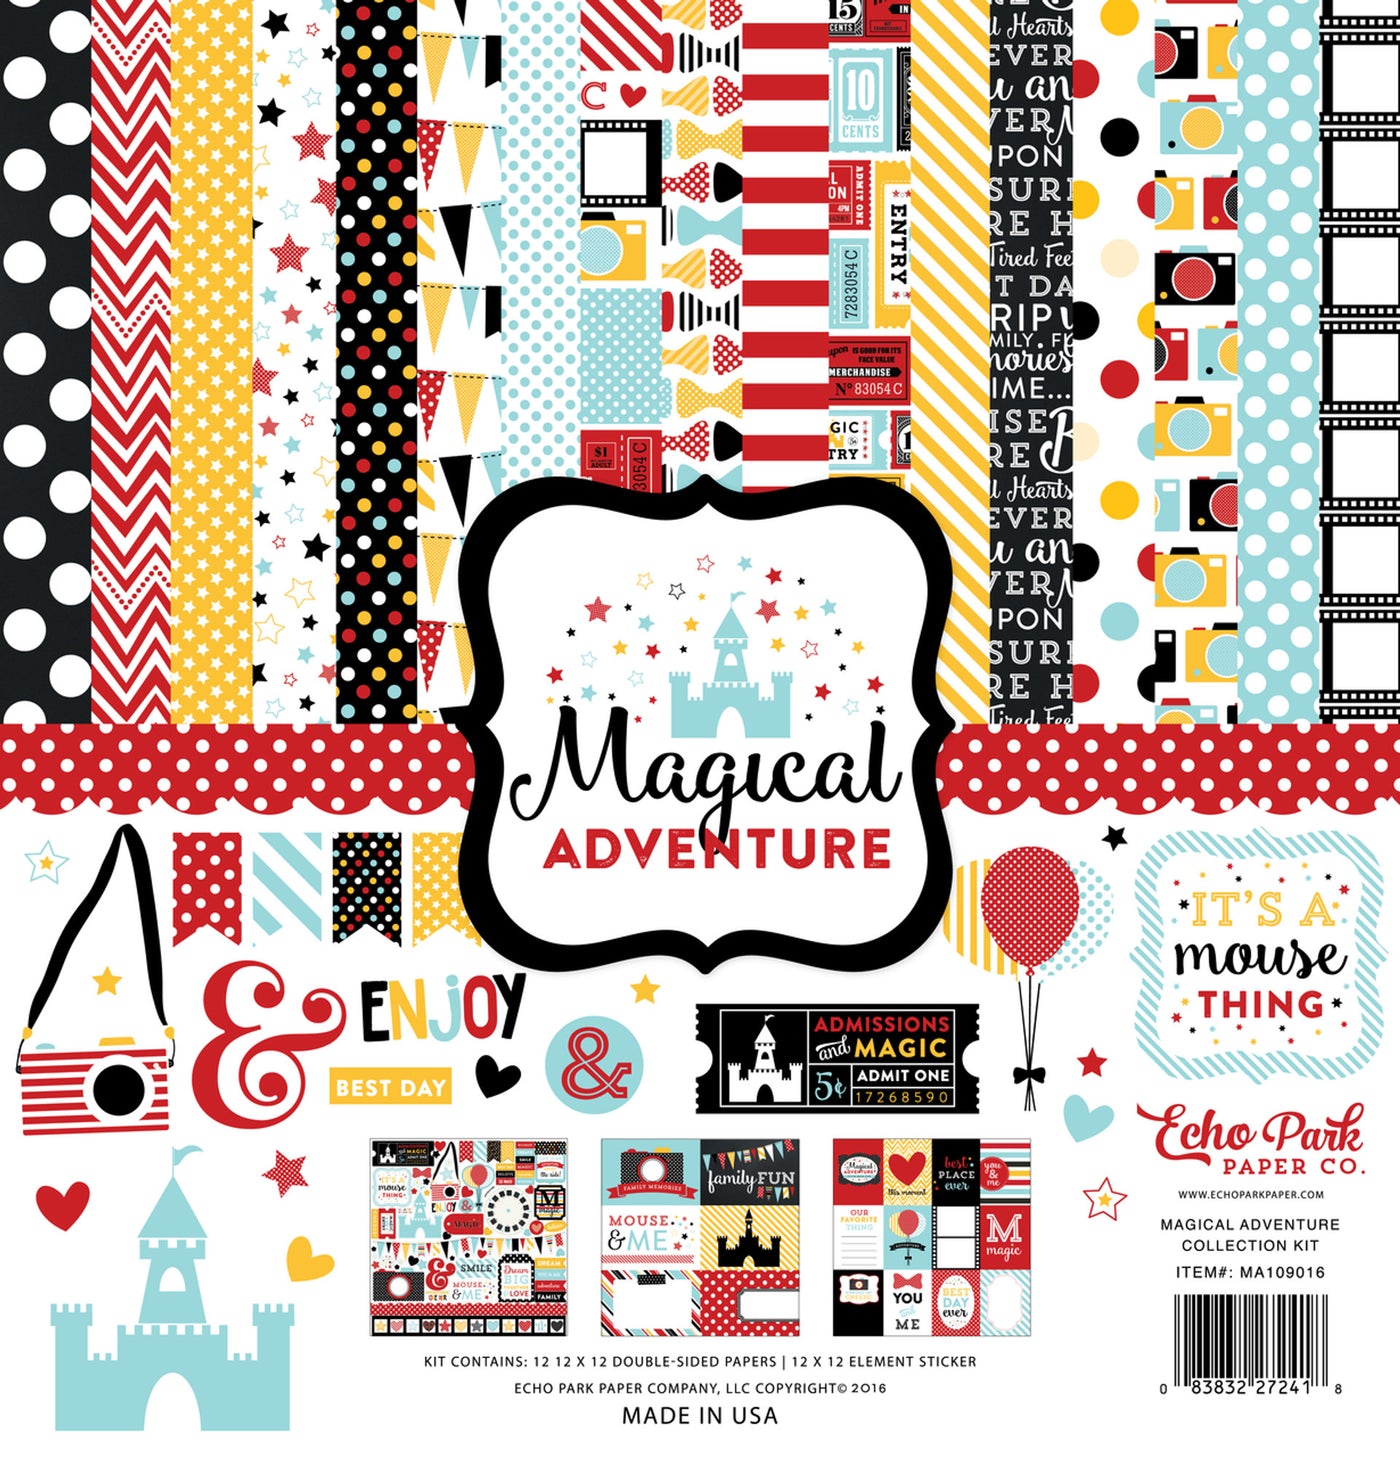 Magical Adventure - 12x12 collection kit with Disney-esque theme by Echo Park Paper